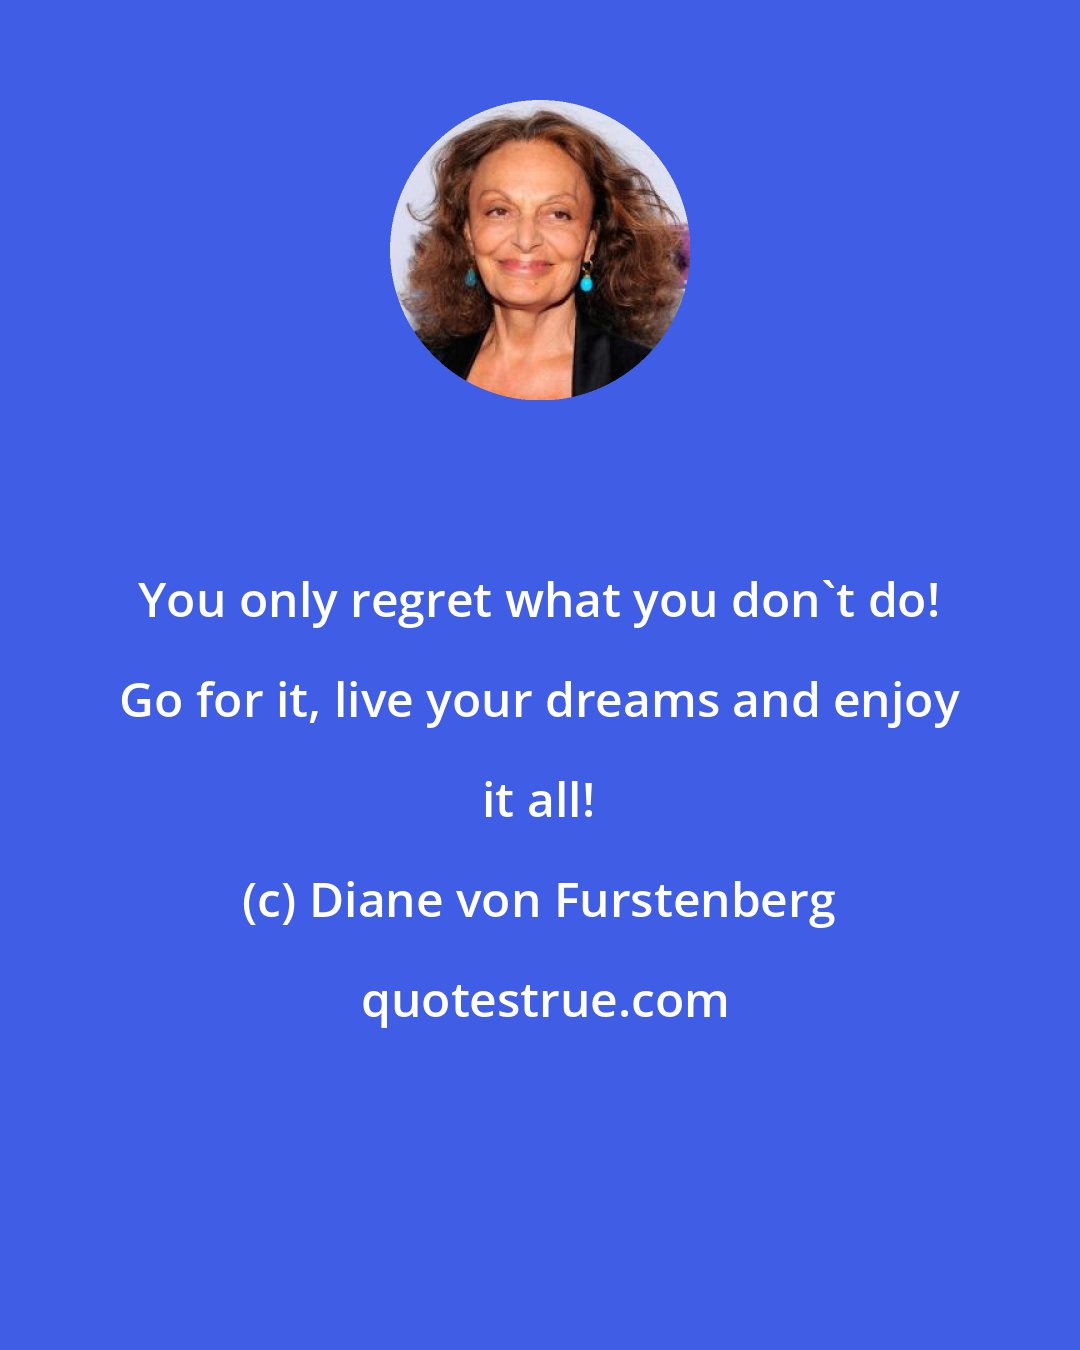 Diane von Furstenberg: You only regret what you don't do! Go for it, live your dreams and enjoy it all!